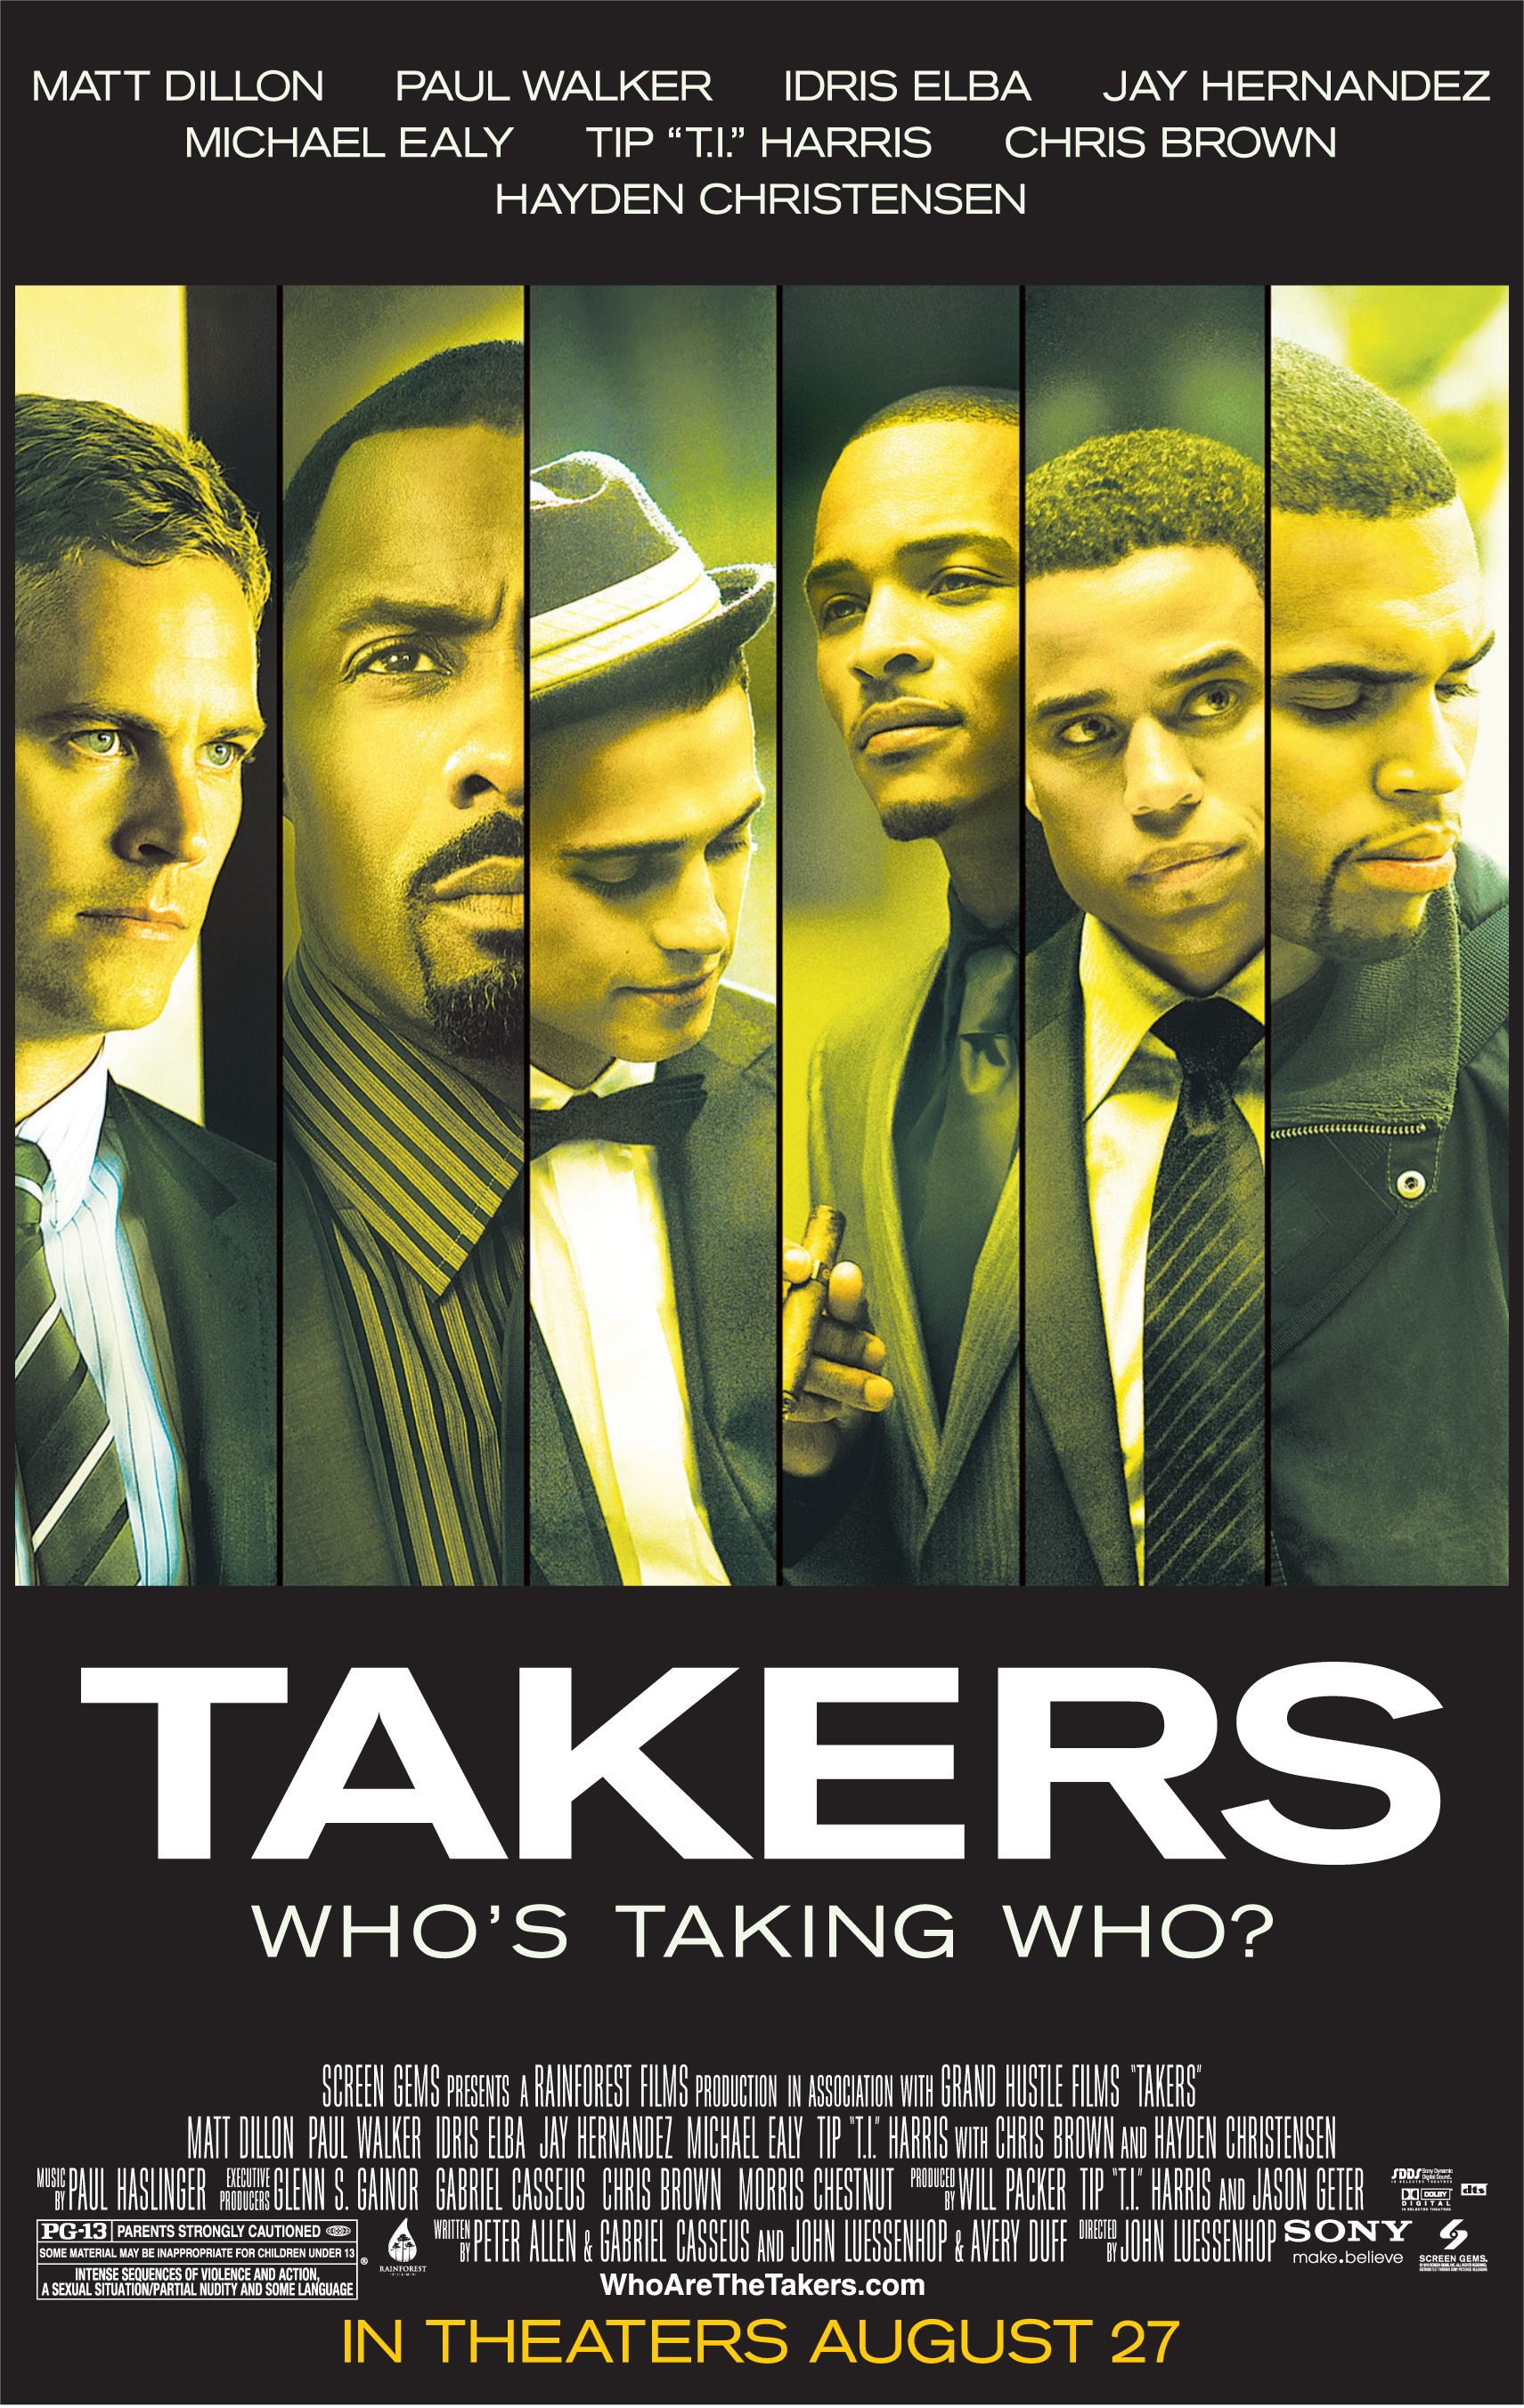 Takers (2010) Movie Poster Image, Picture, Photo, Icon and Wallpaper: Ravepad place to rave about anything and everything!